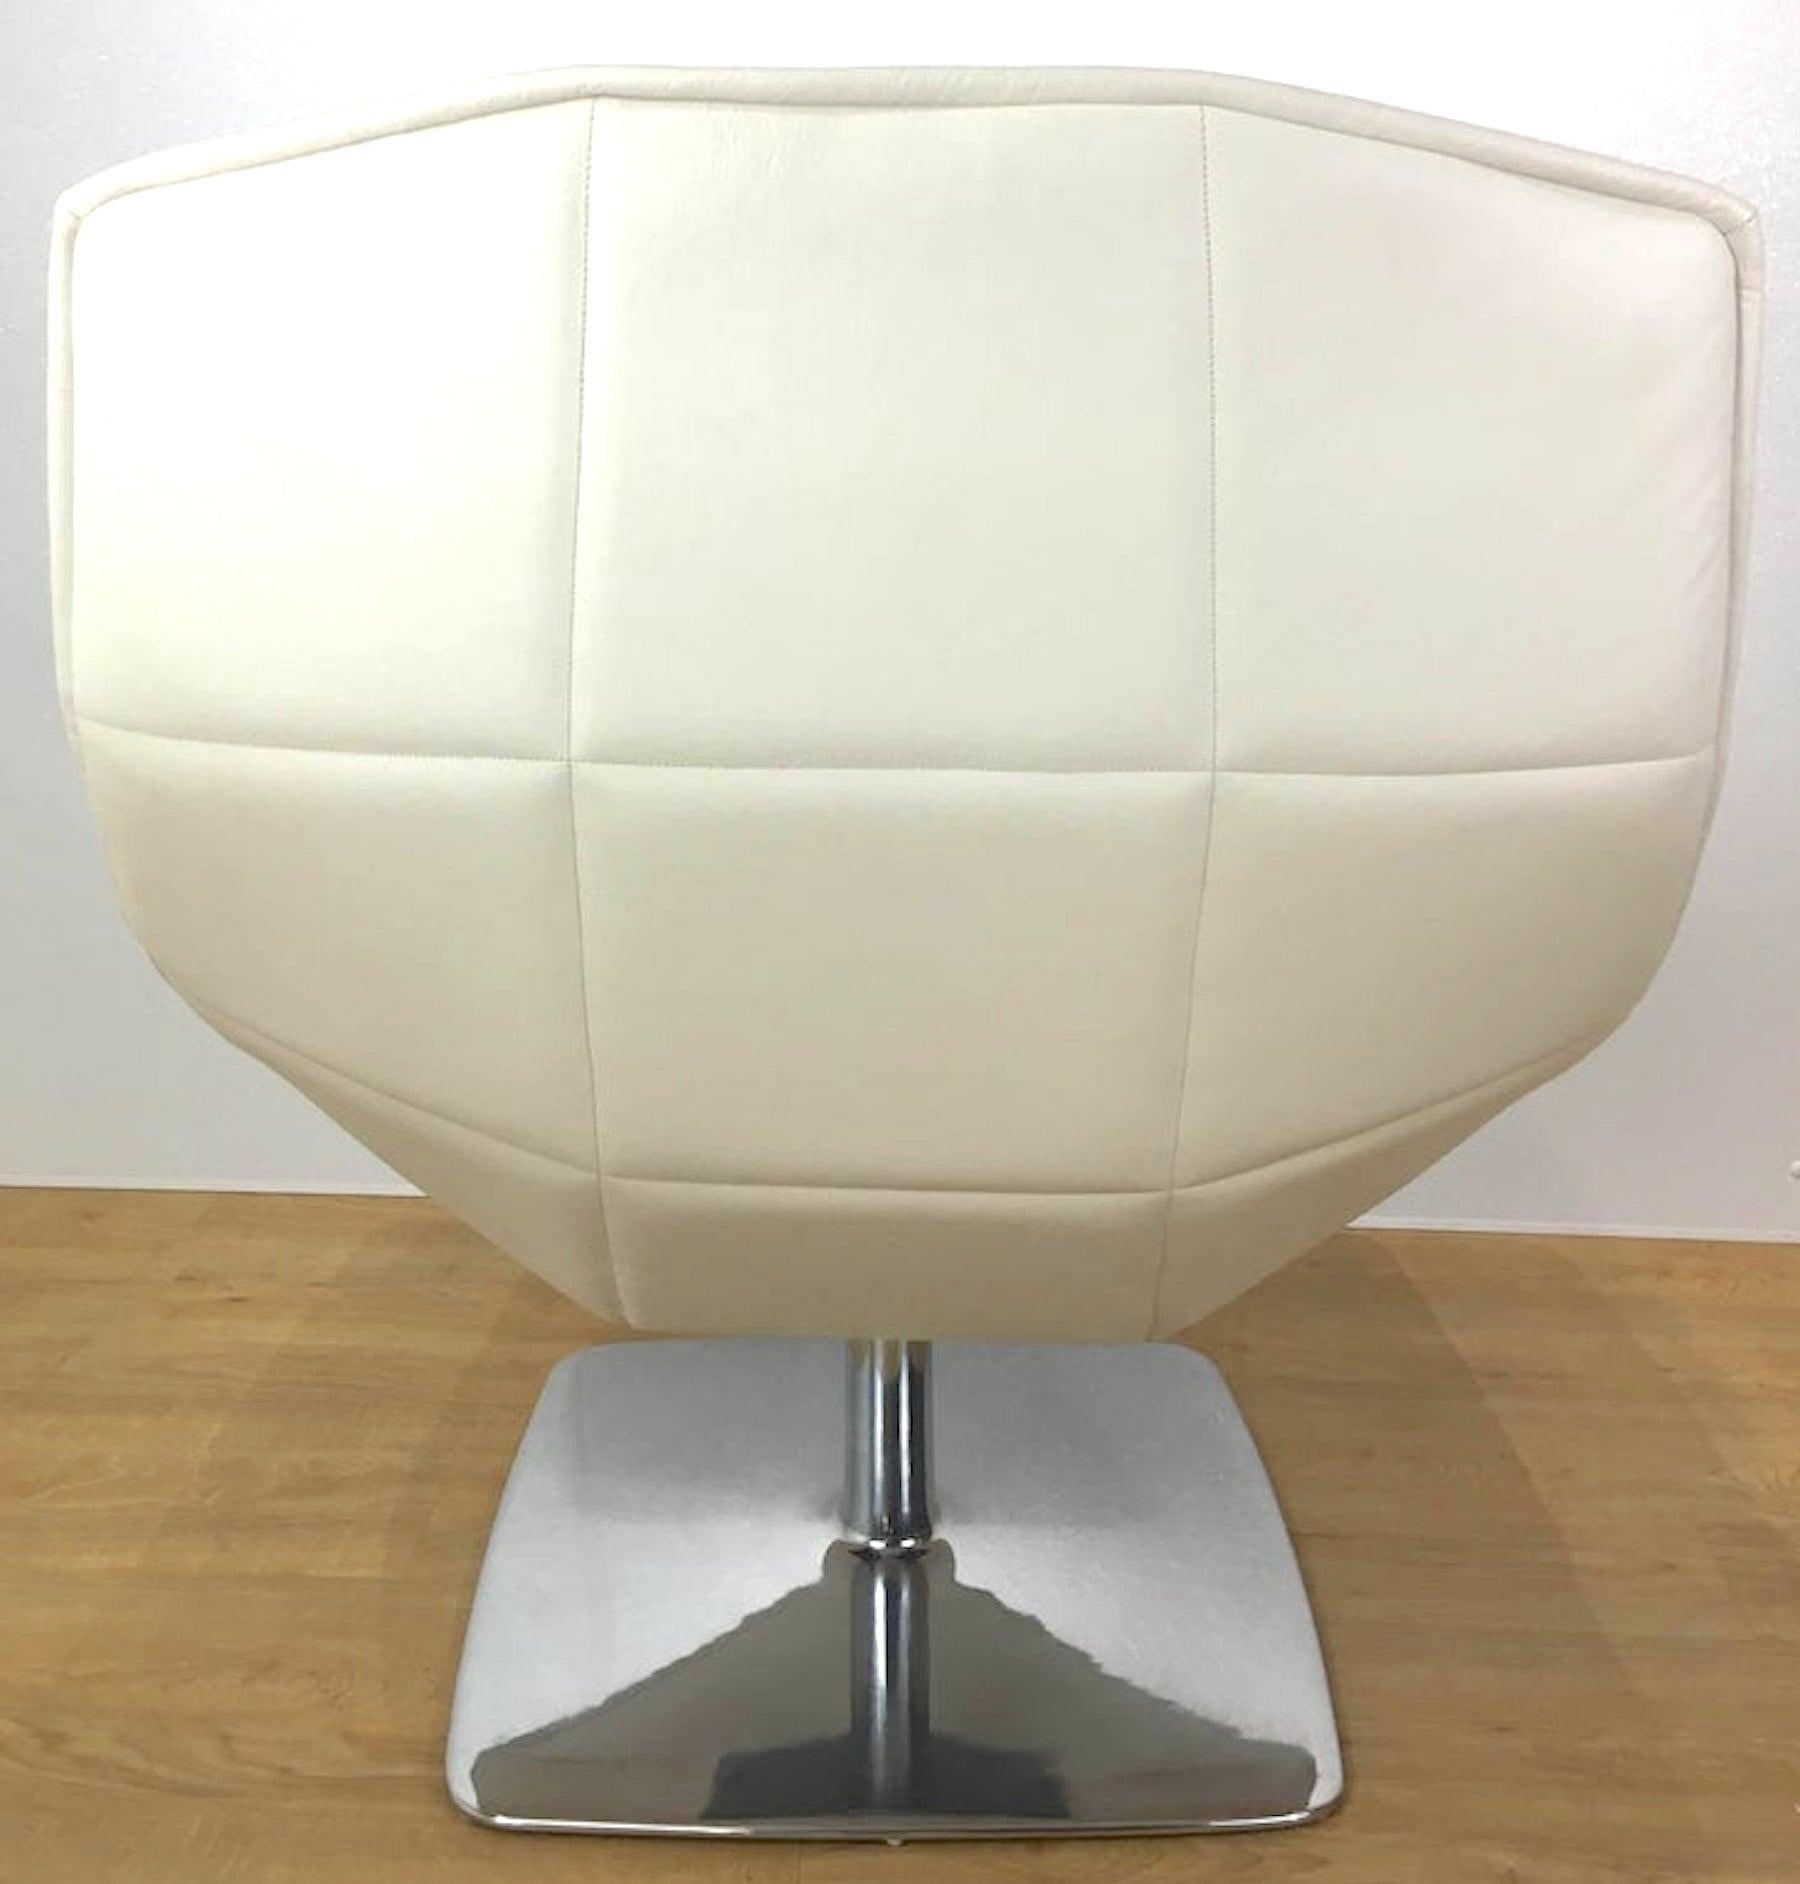 Jehs and Laub for Knoll Chair In Good Condition For Sale In West Palm Beach, FL